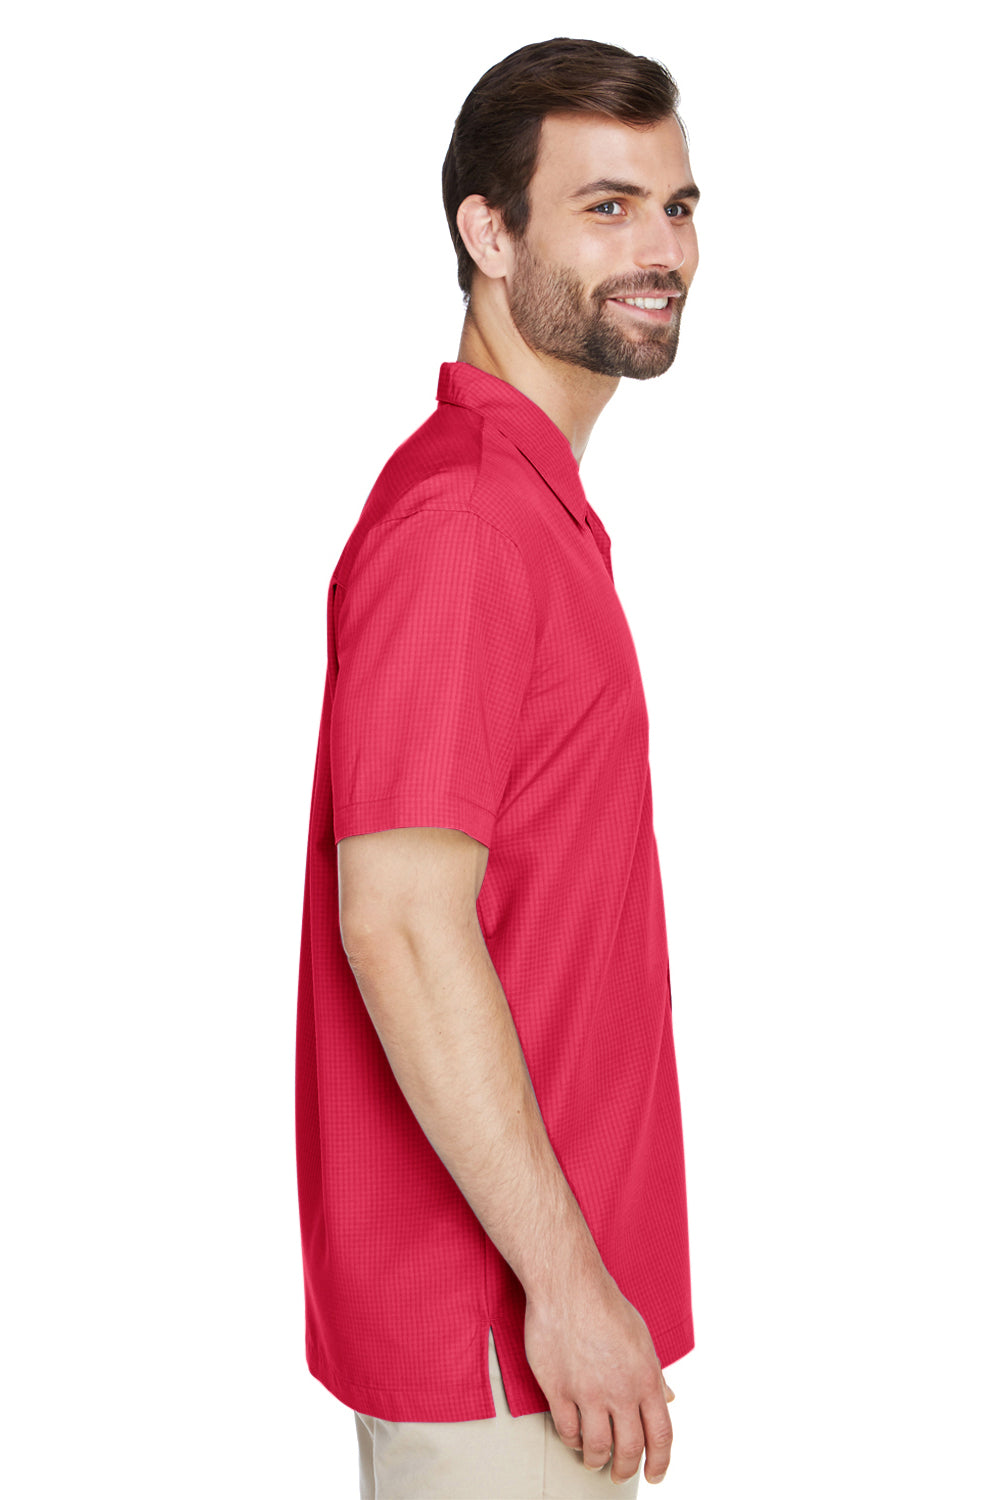 Harriton M560 Mens Barbados Wrinkle Resistant Short Sleeve Button Down Camp Shirt w/ Pocket Red Side